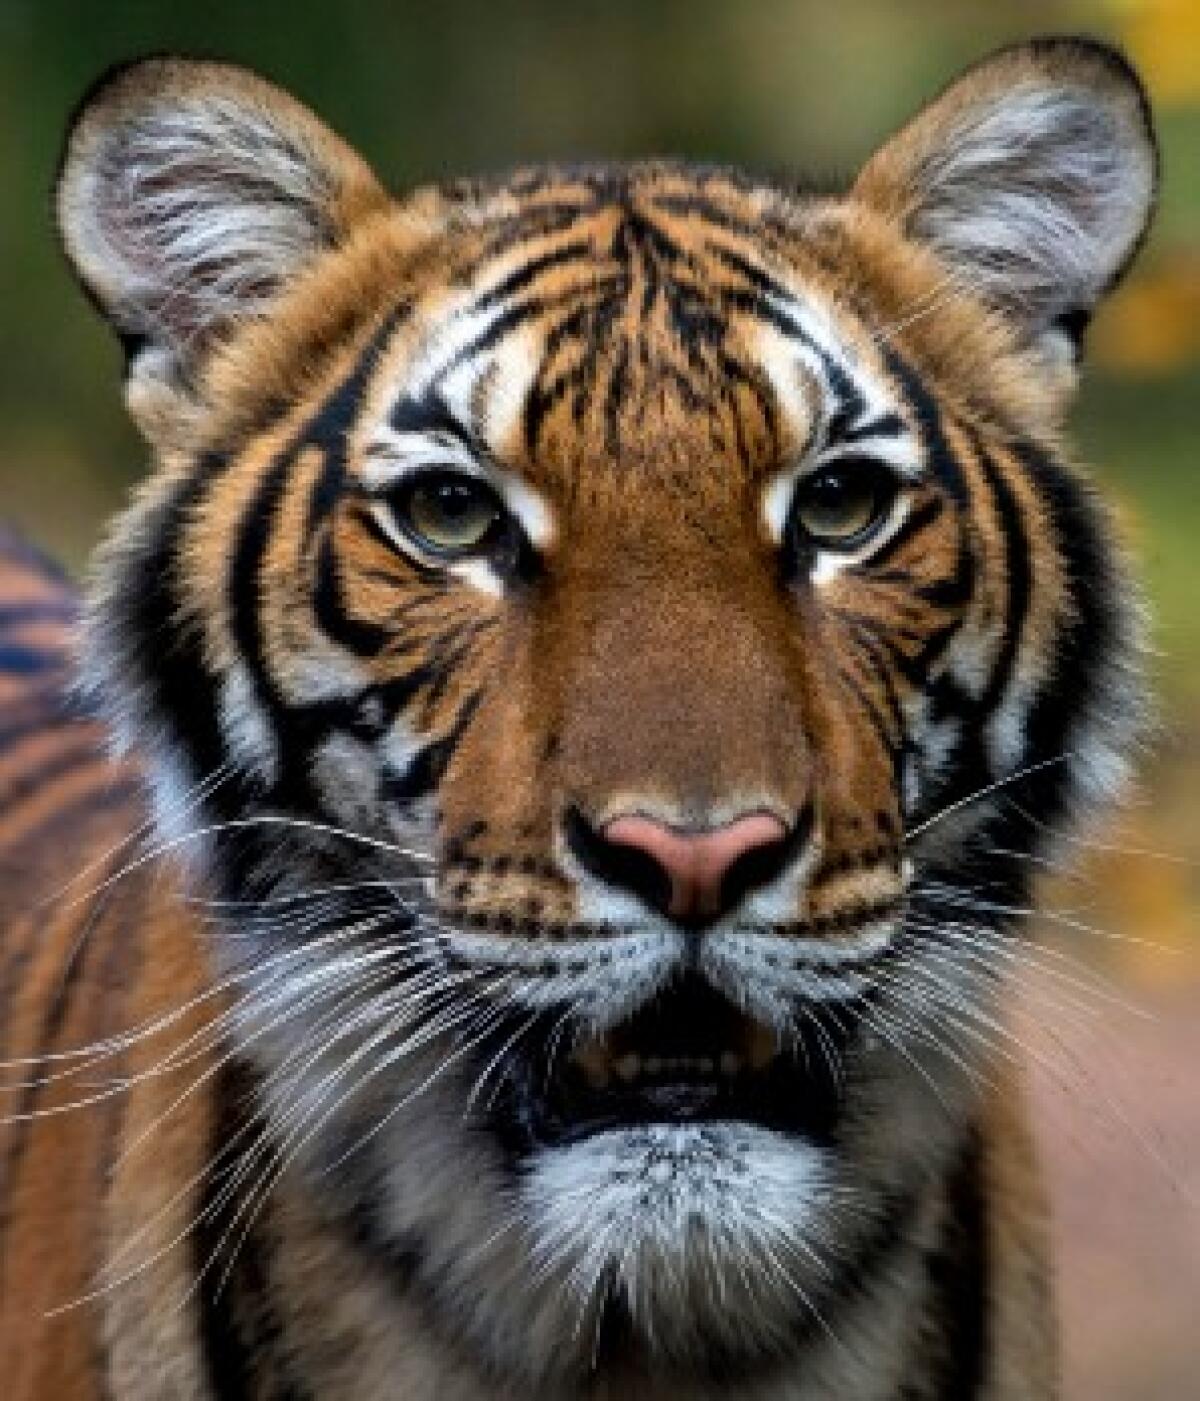 Nadia, a 4-year-old Malayan tiger at the Bronx Zoo, tested positive for the novel coronavirus after being exposed to an infected, but asymptomatic, zookeeper.